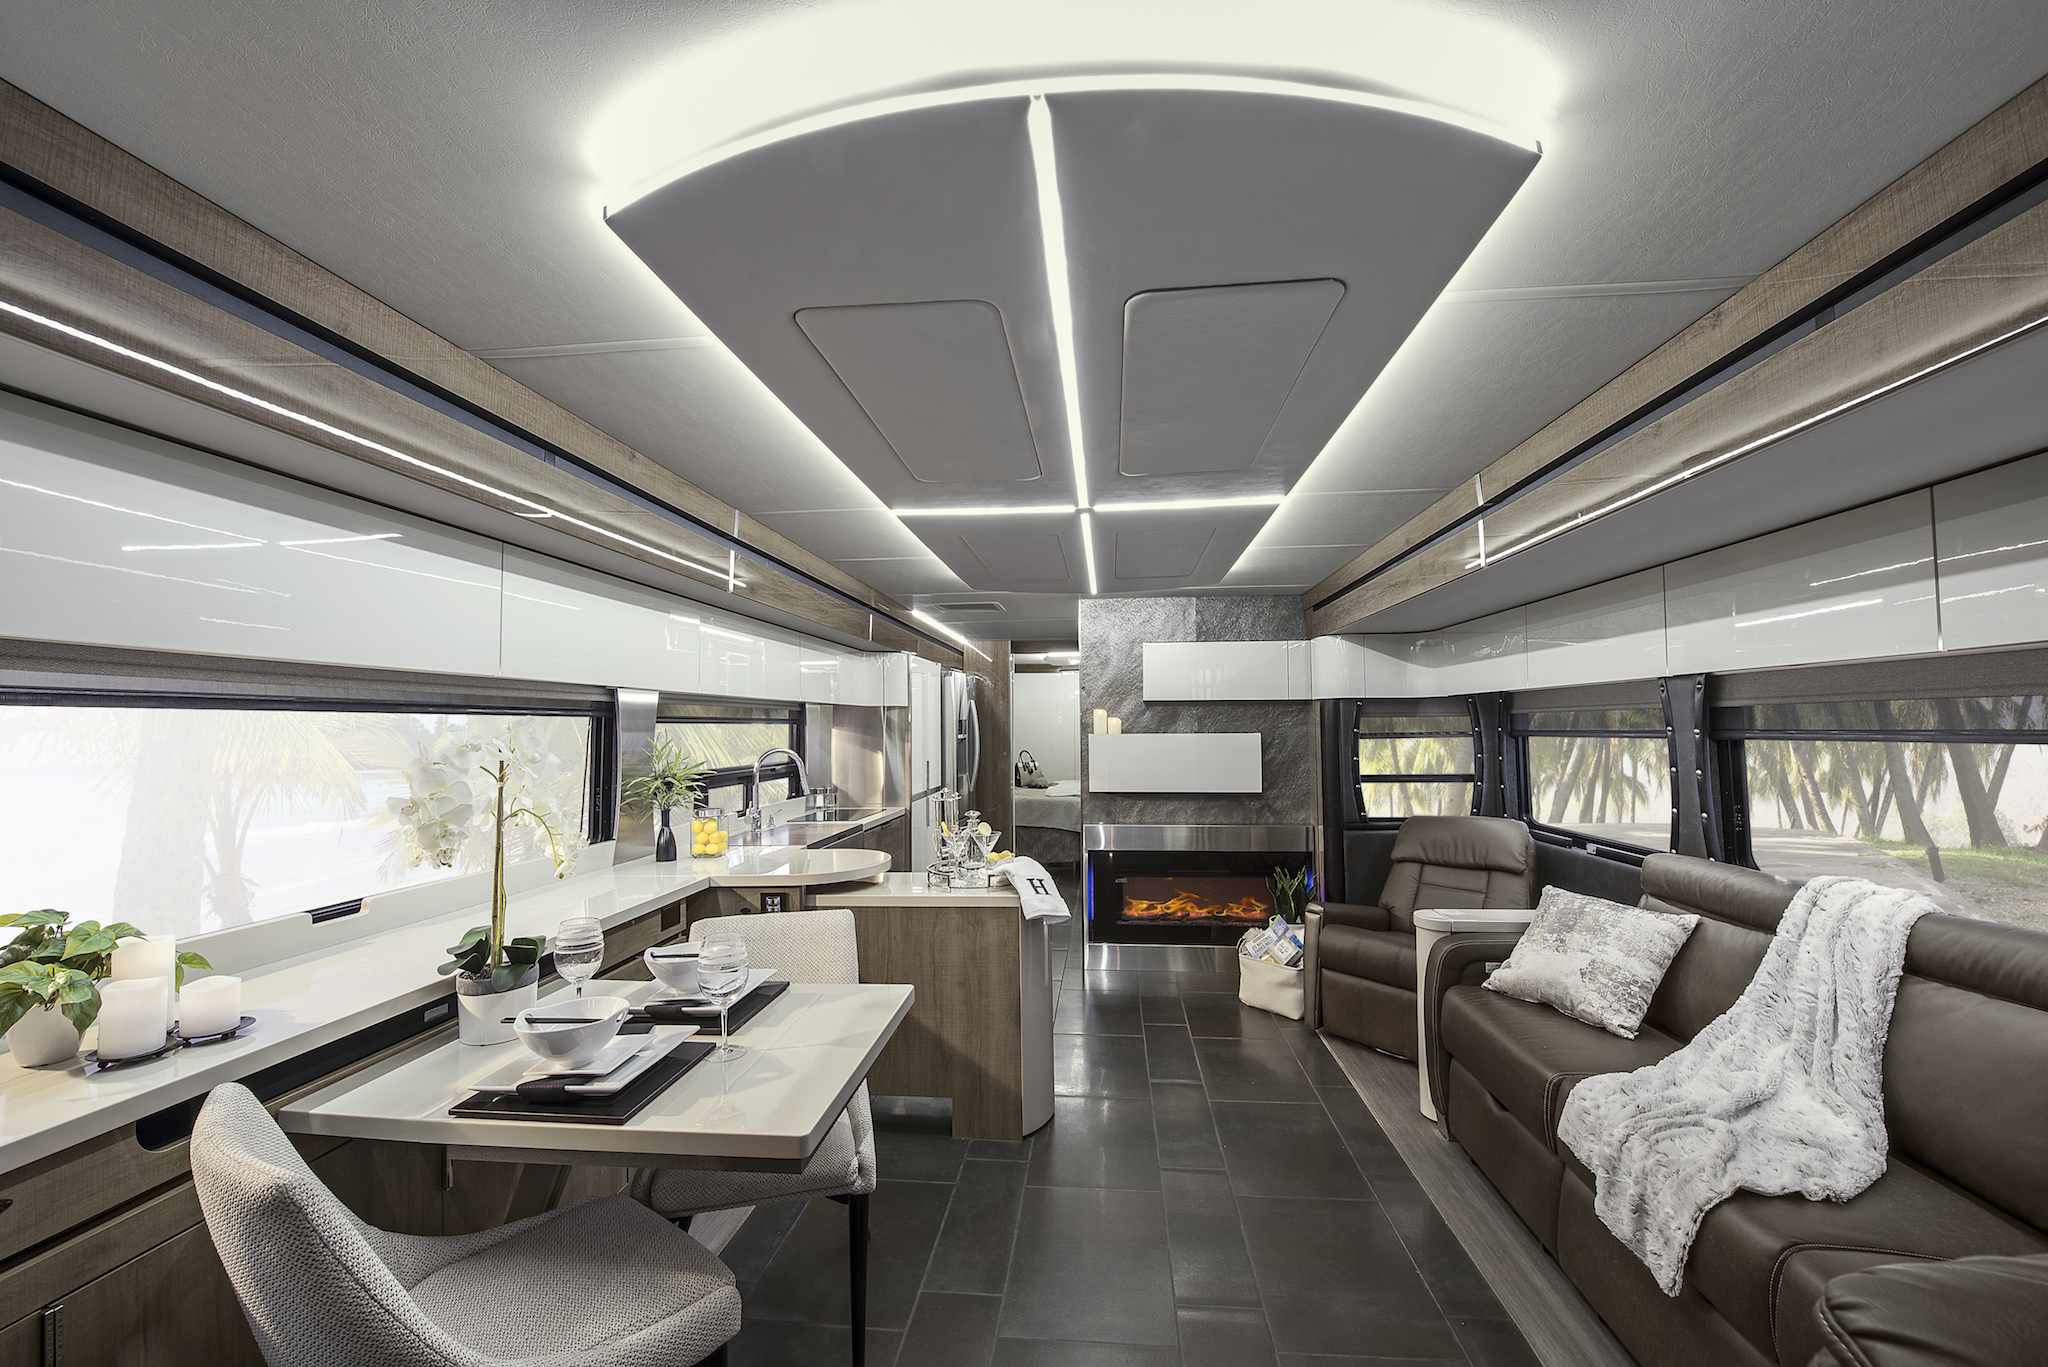 Modern interior of Winnebago Horizon with backlit LED lights on ceiling panel that brighten the space.